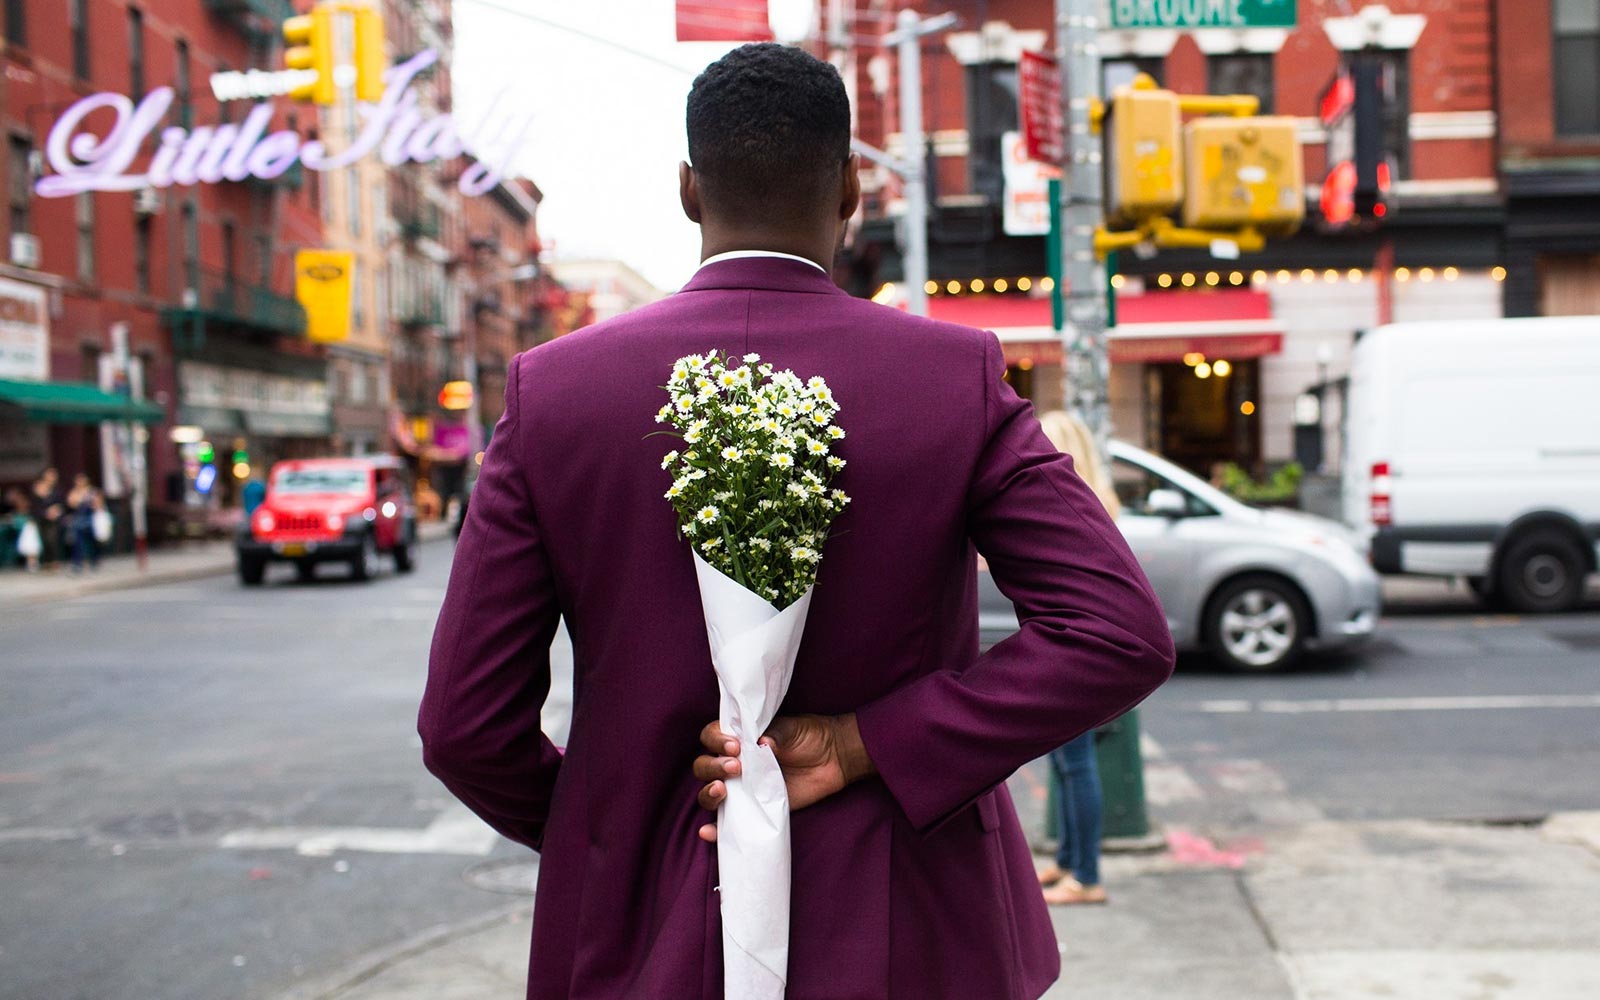 Man wearing purple suits holding flowers behind his back